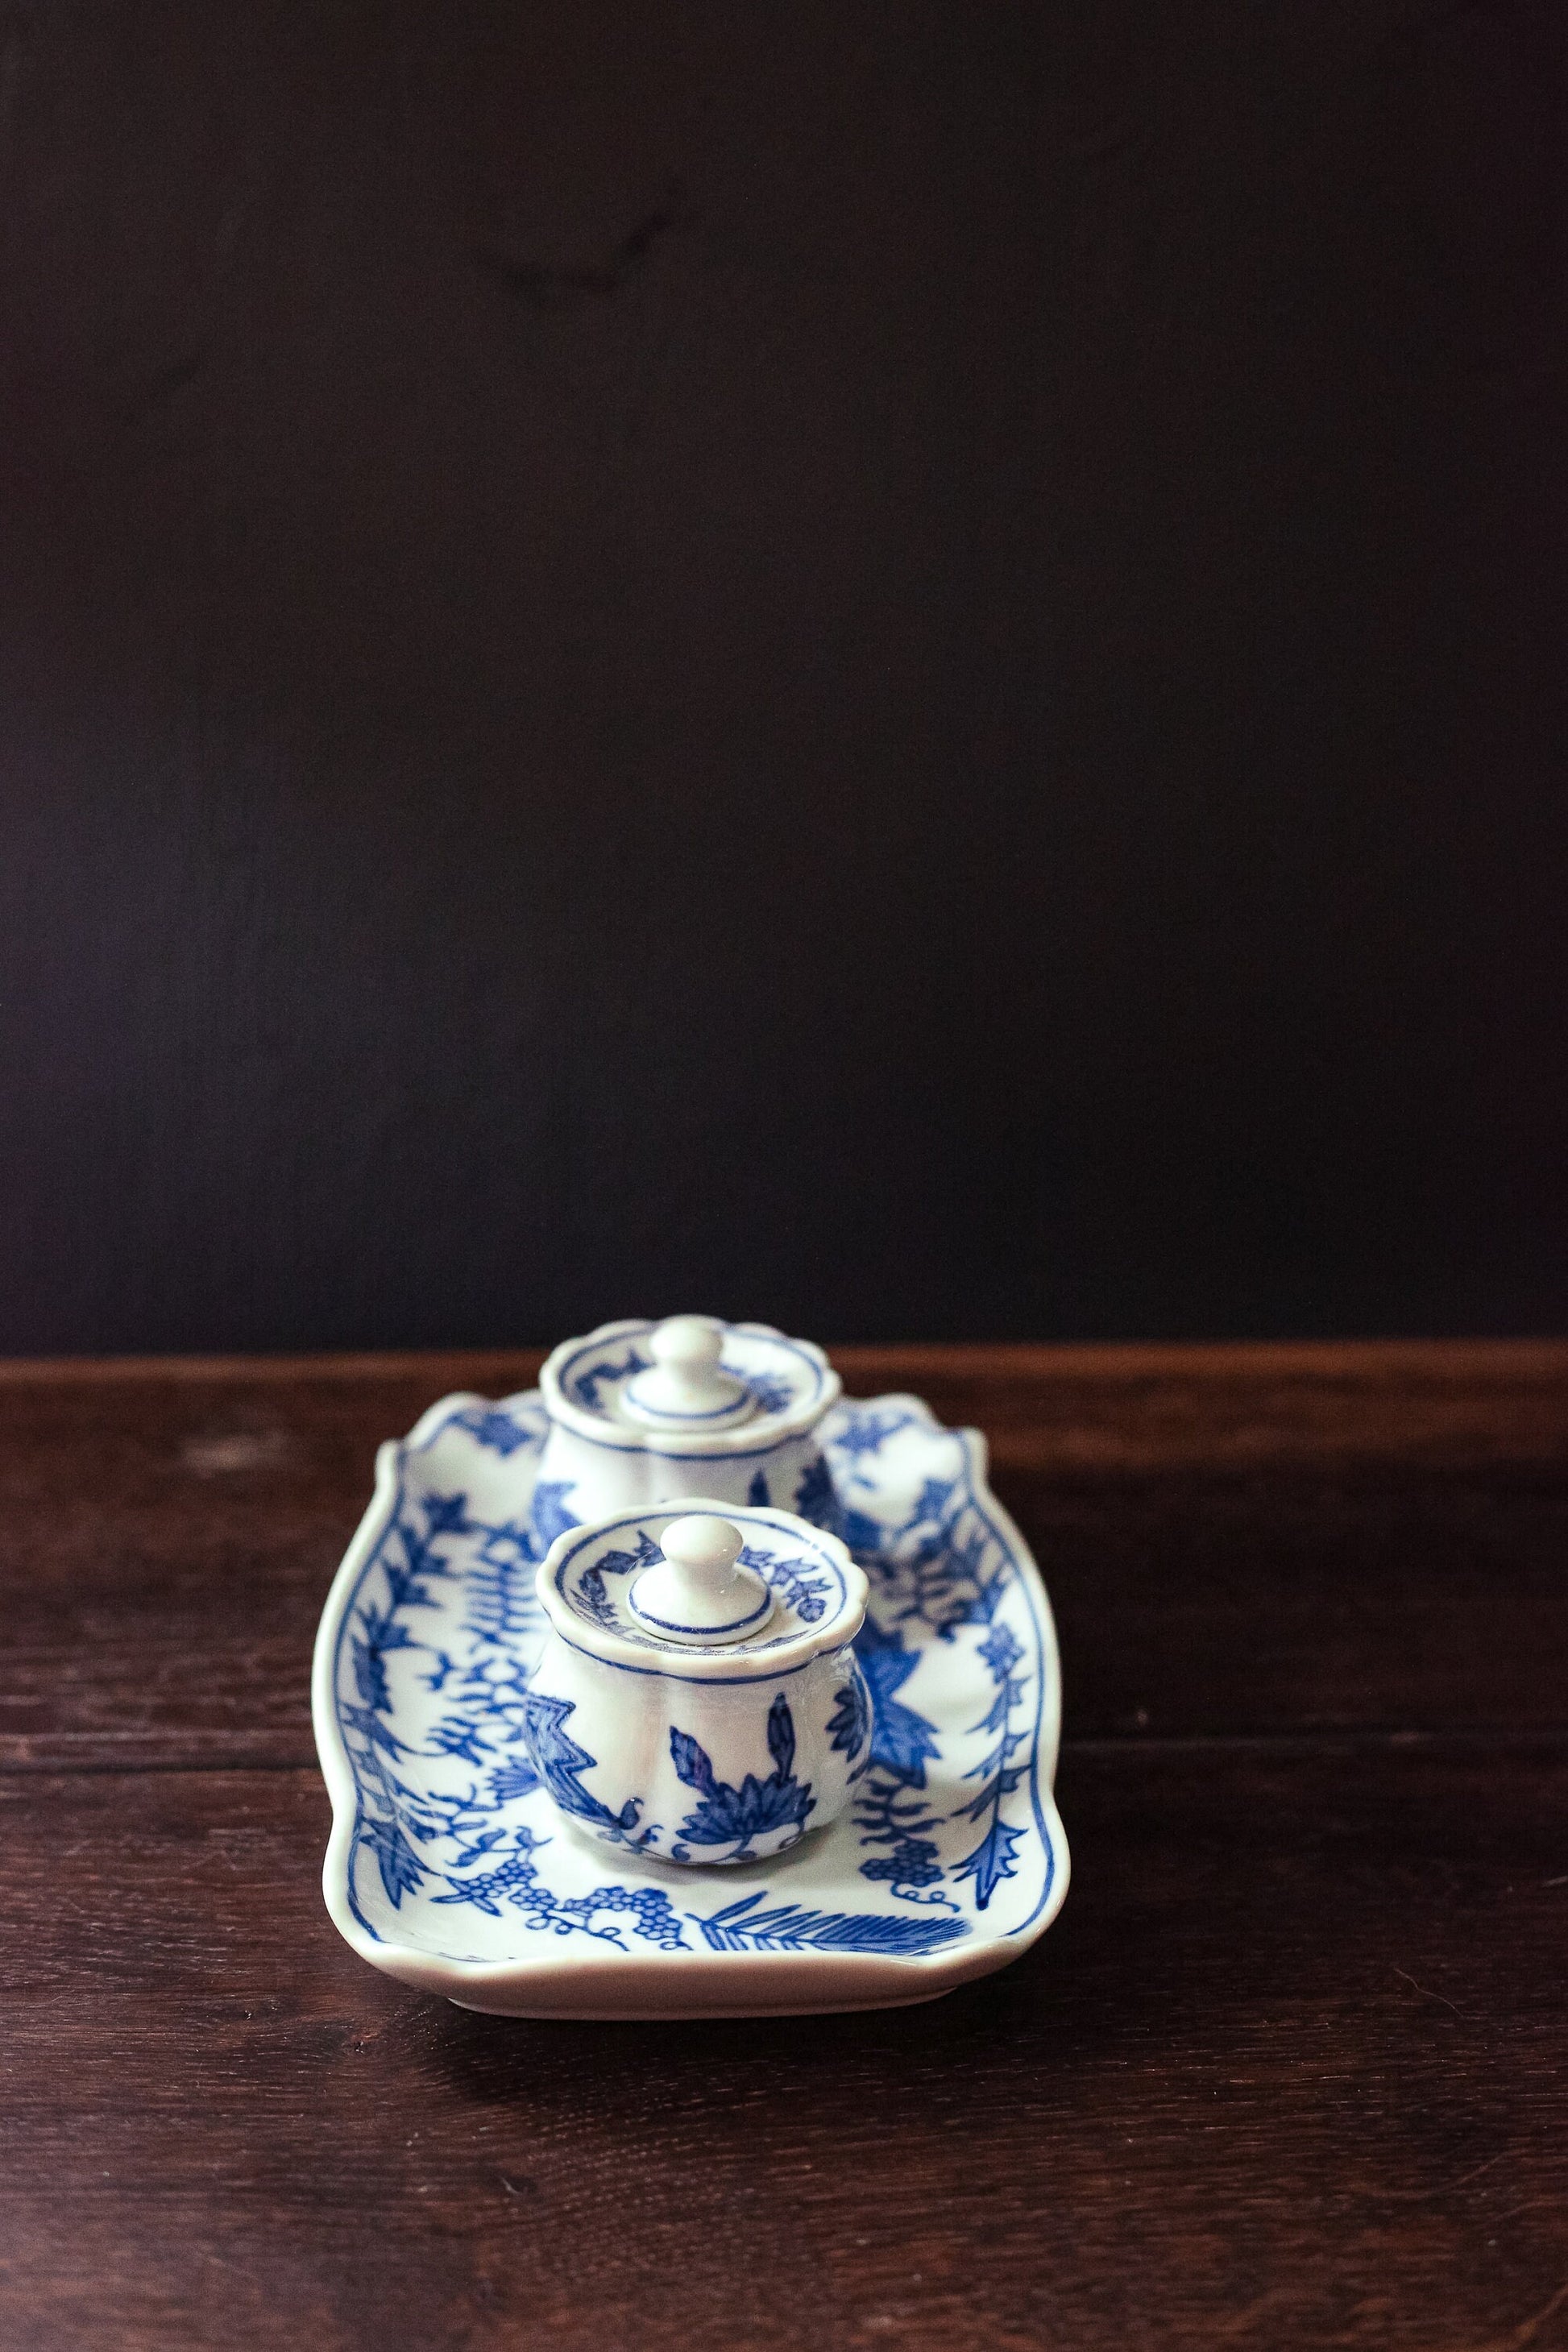 Blue Onion Ceramic Salt Pepper Serving Tray with Containers & Lids - Vintage Blue White Porcelain Tableware